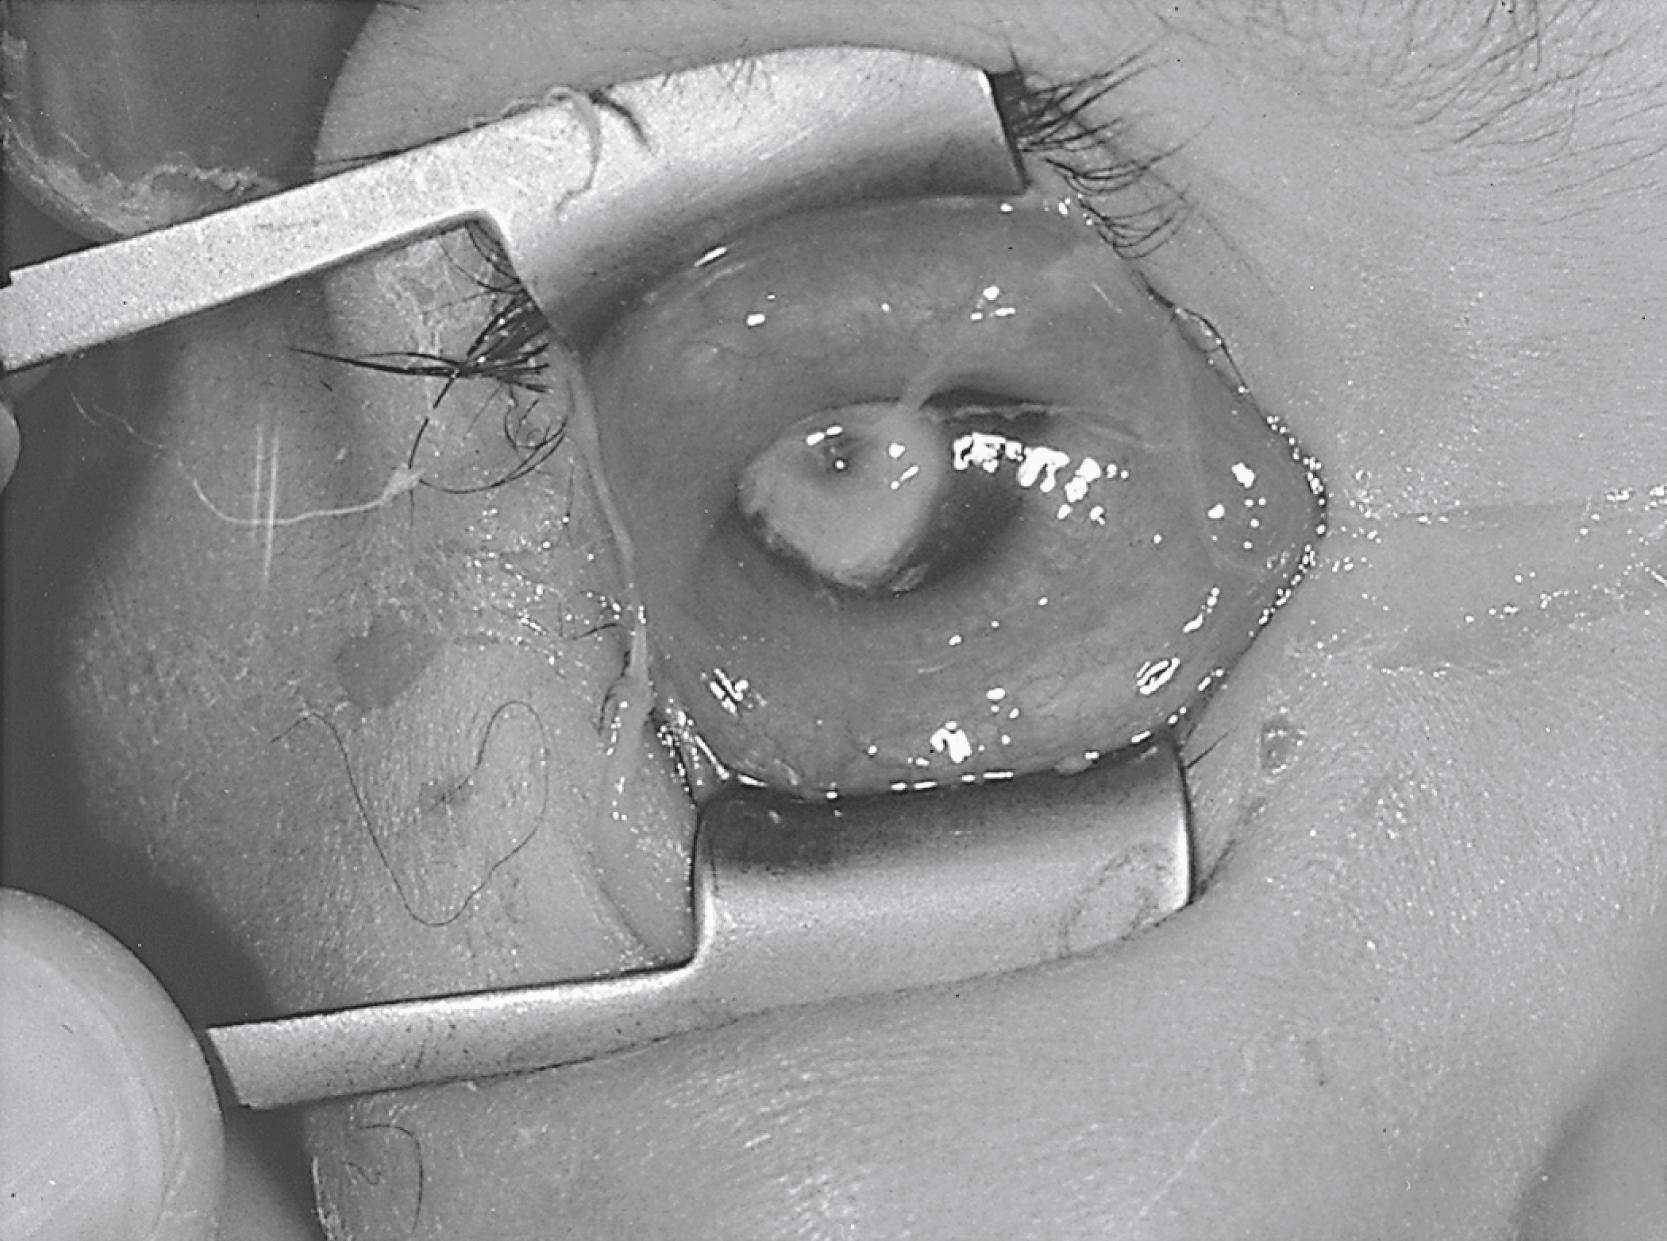 FIGURE 81.4, Perforated keratitis due to Streptococcus pneumoniae in a 3-year-old child after an eye injury.